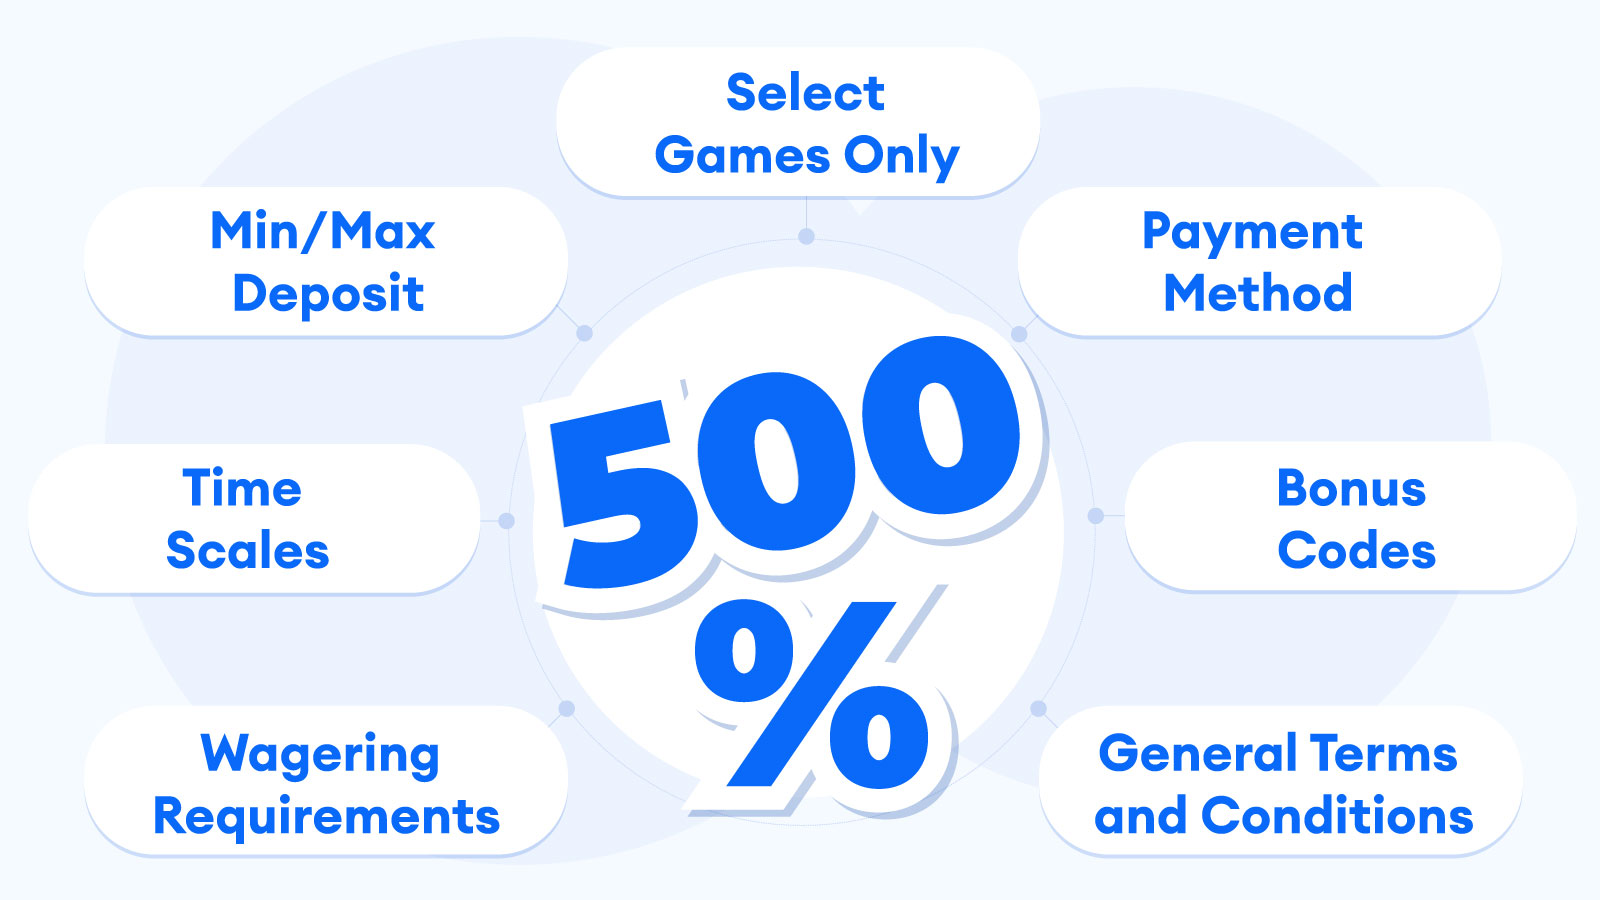 Typical Terms & Conditions You’ll Find With 500% Deposit Casino Bonuses in New Zealand